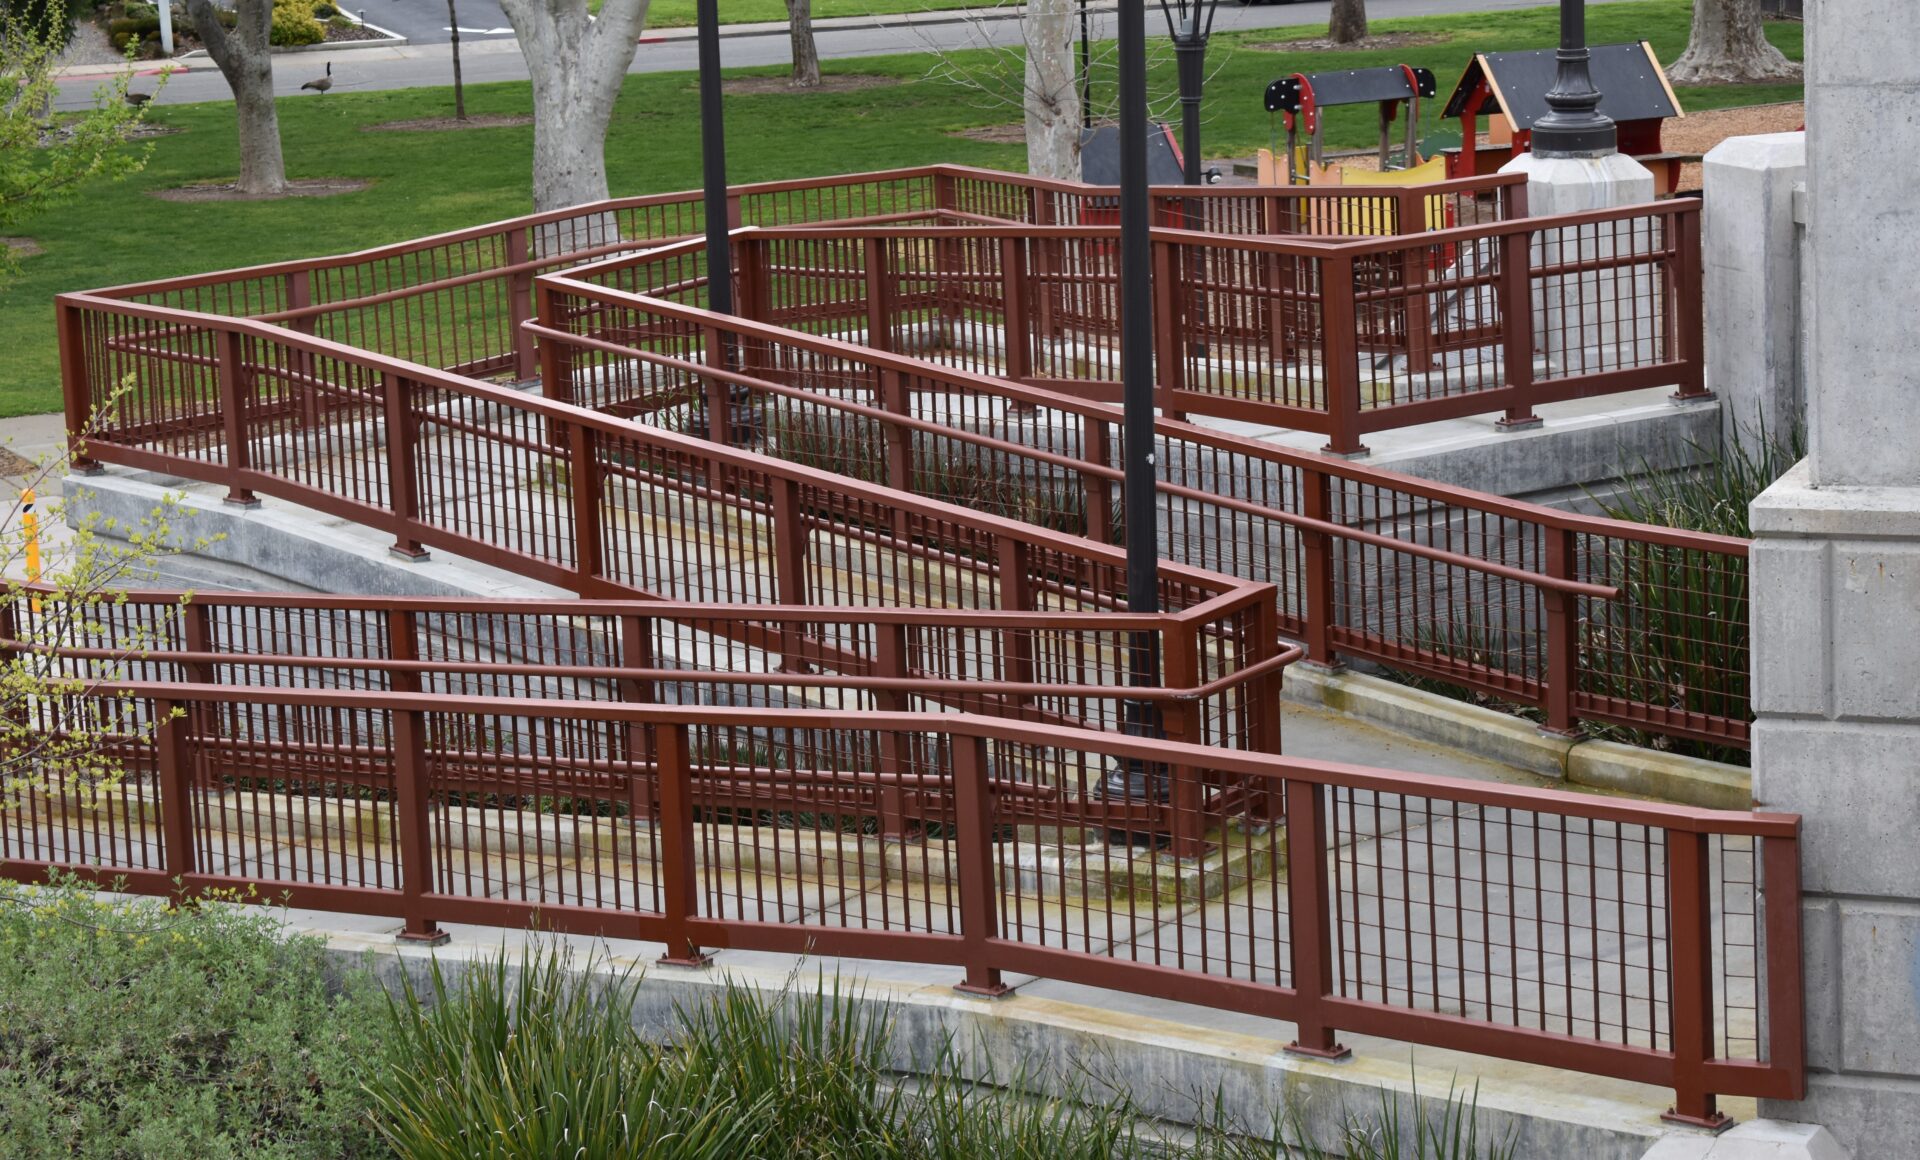 Opus60 infill used for graded pedestrian walkway